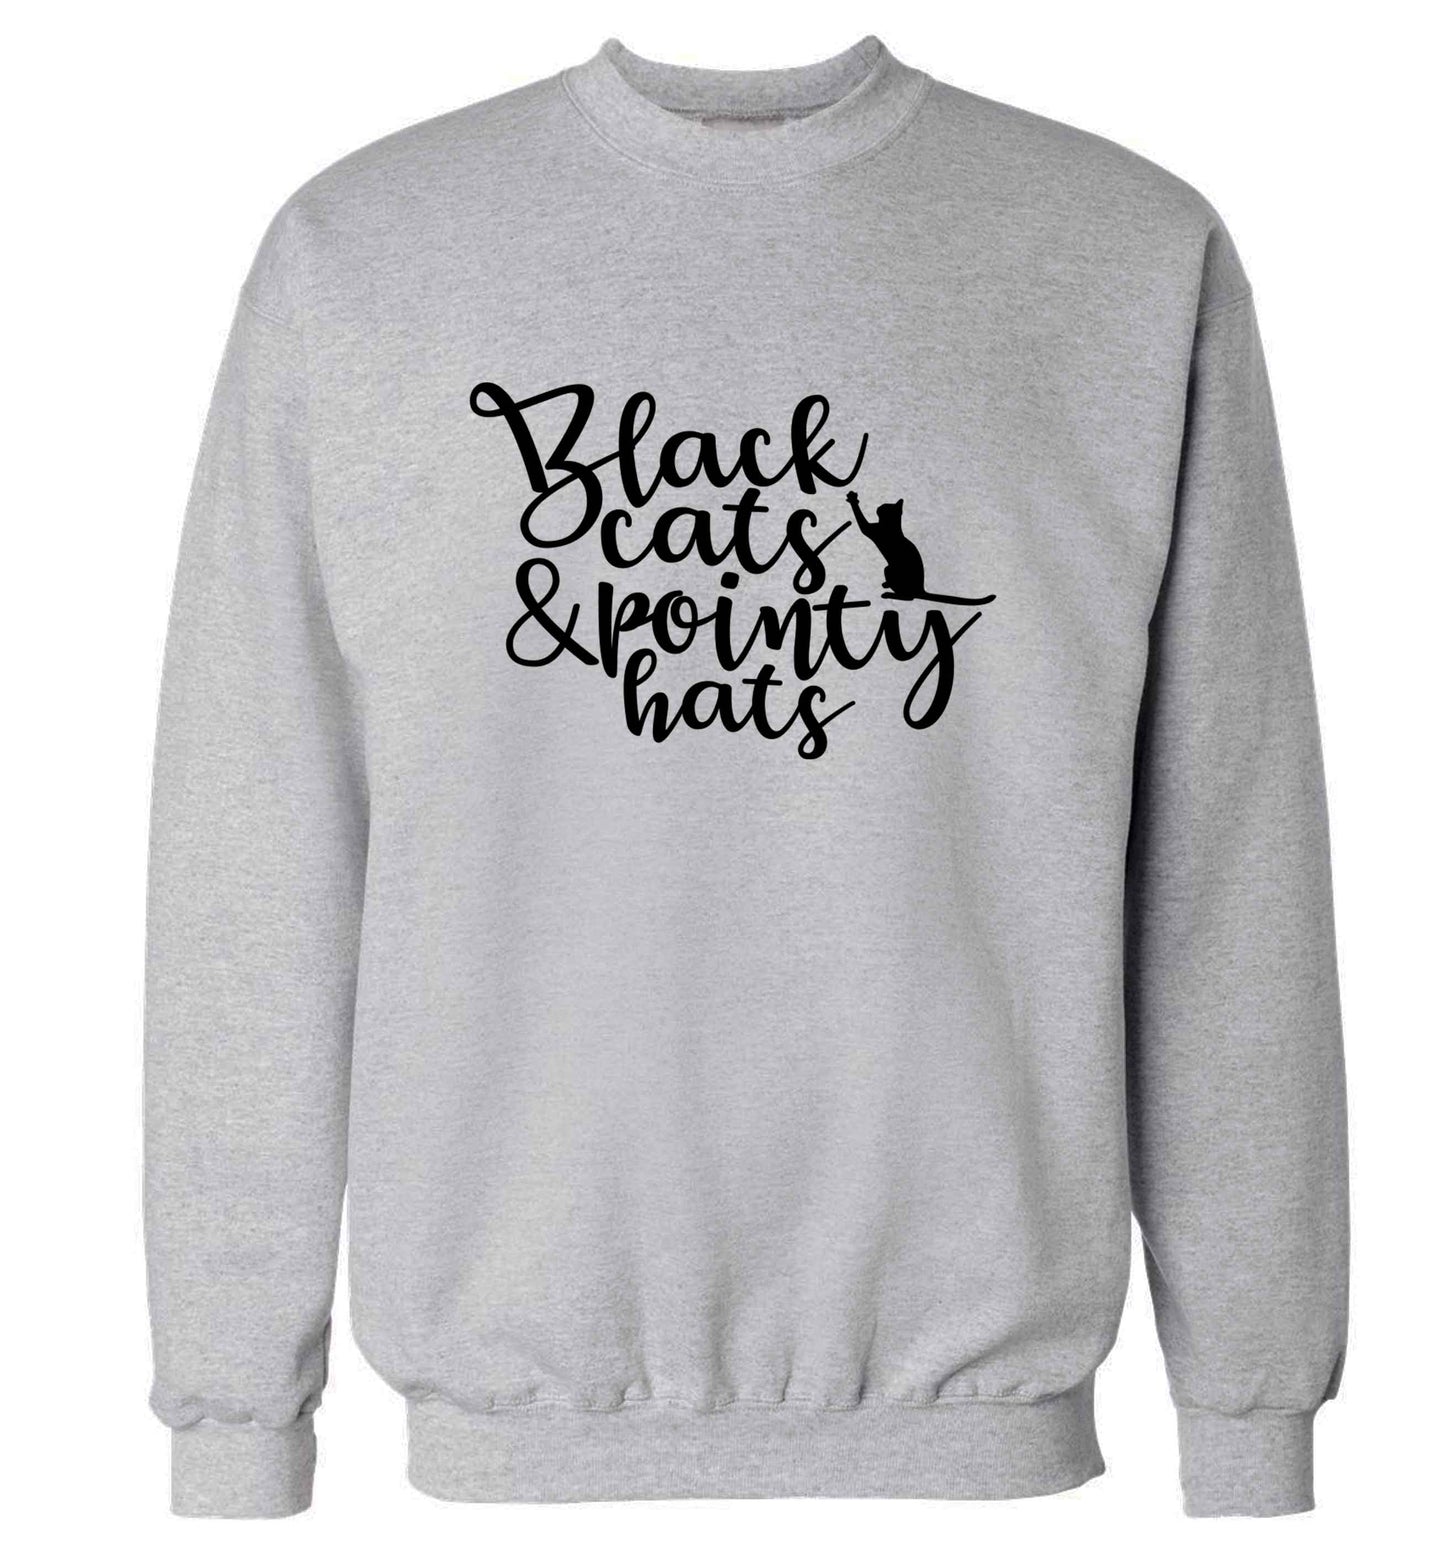 Black cats and pointy hats adult's unisex grey sweater 2XL